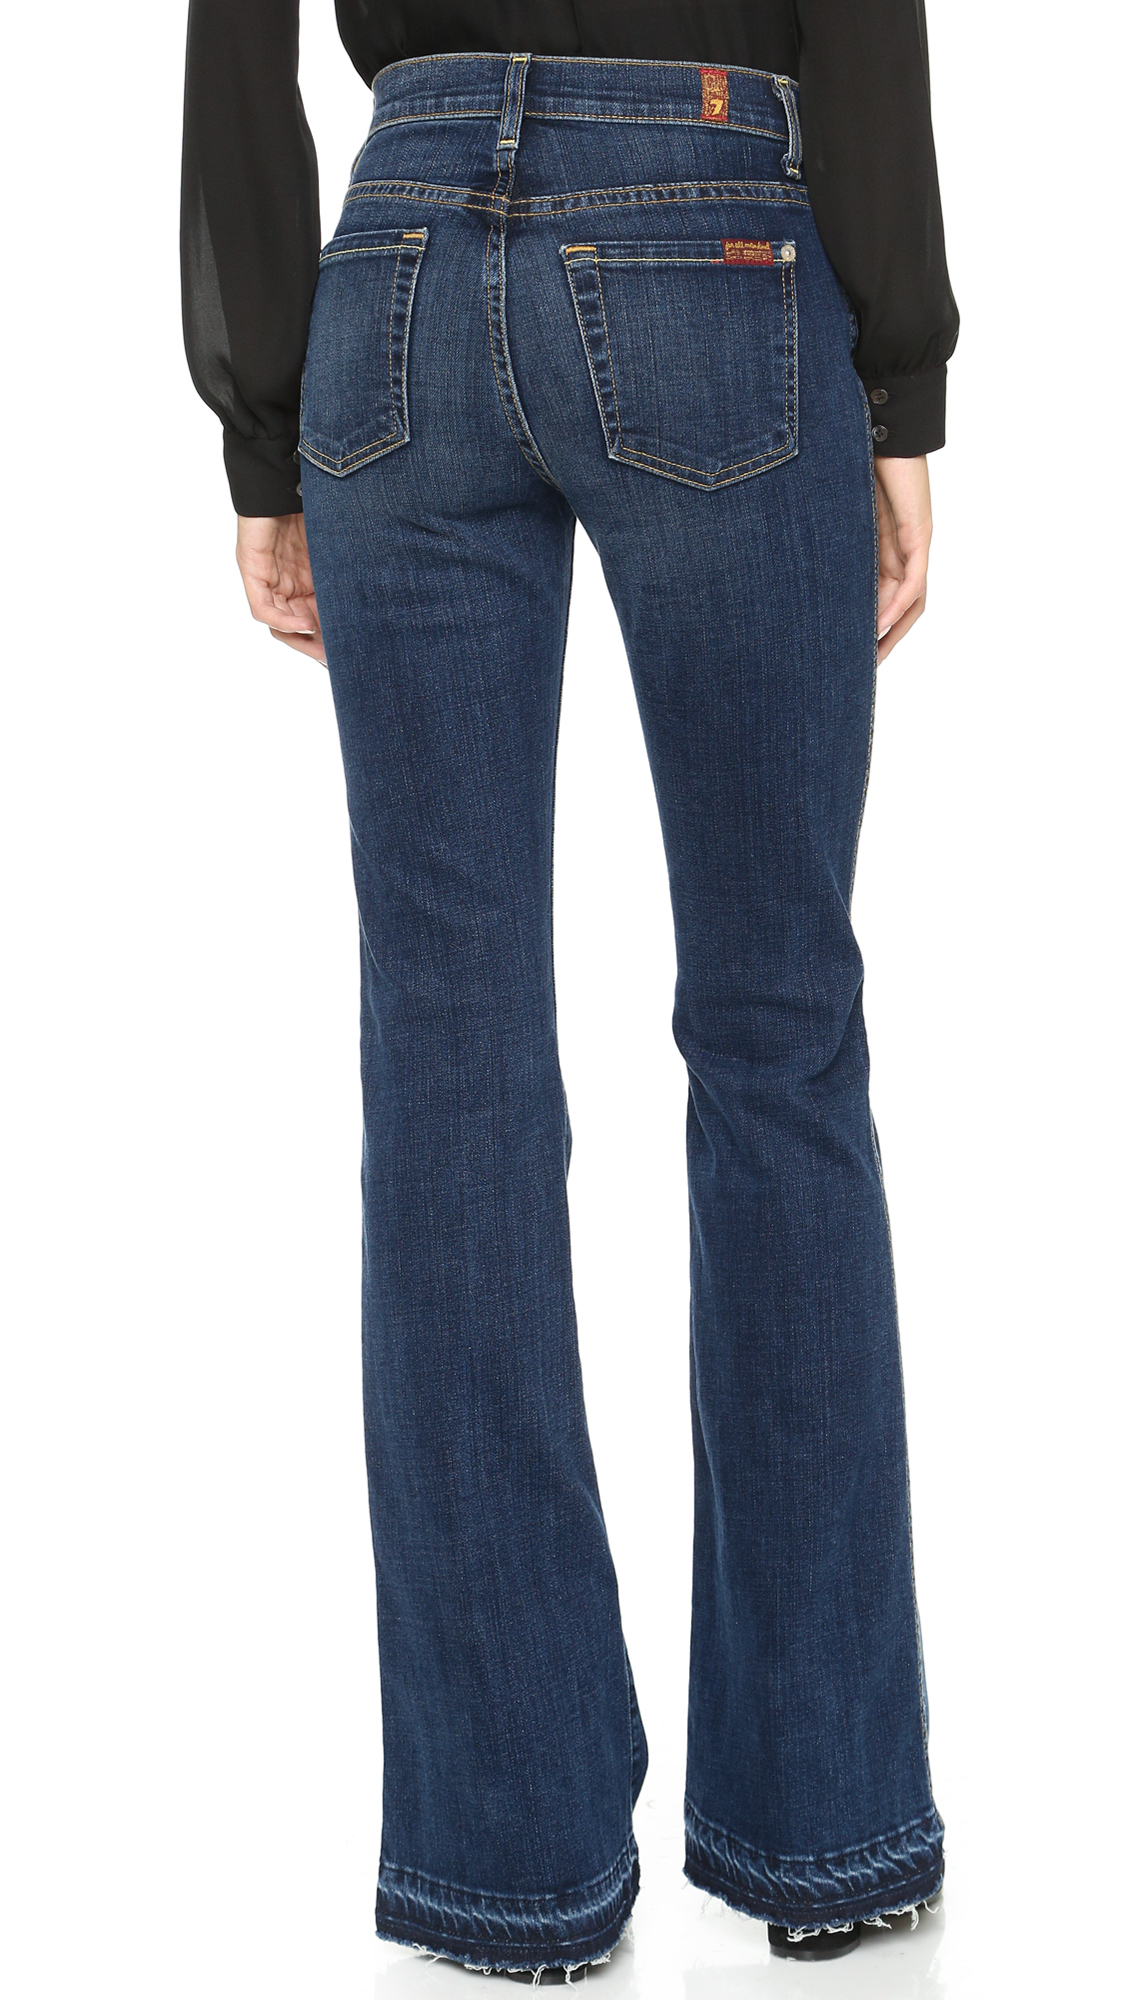 7 For All Mankind Denim High Waisted Boot Cut Jeans in Blue - Lyst